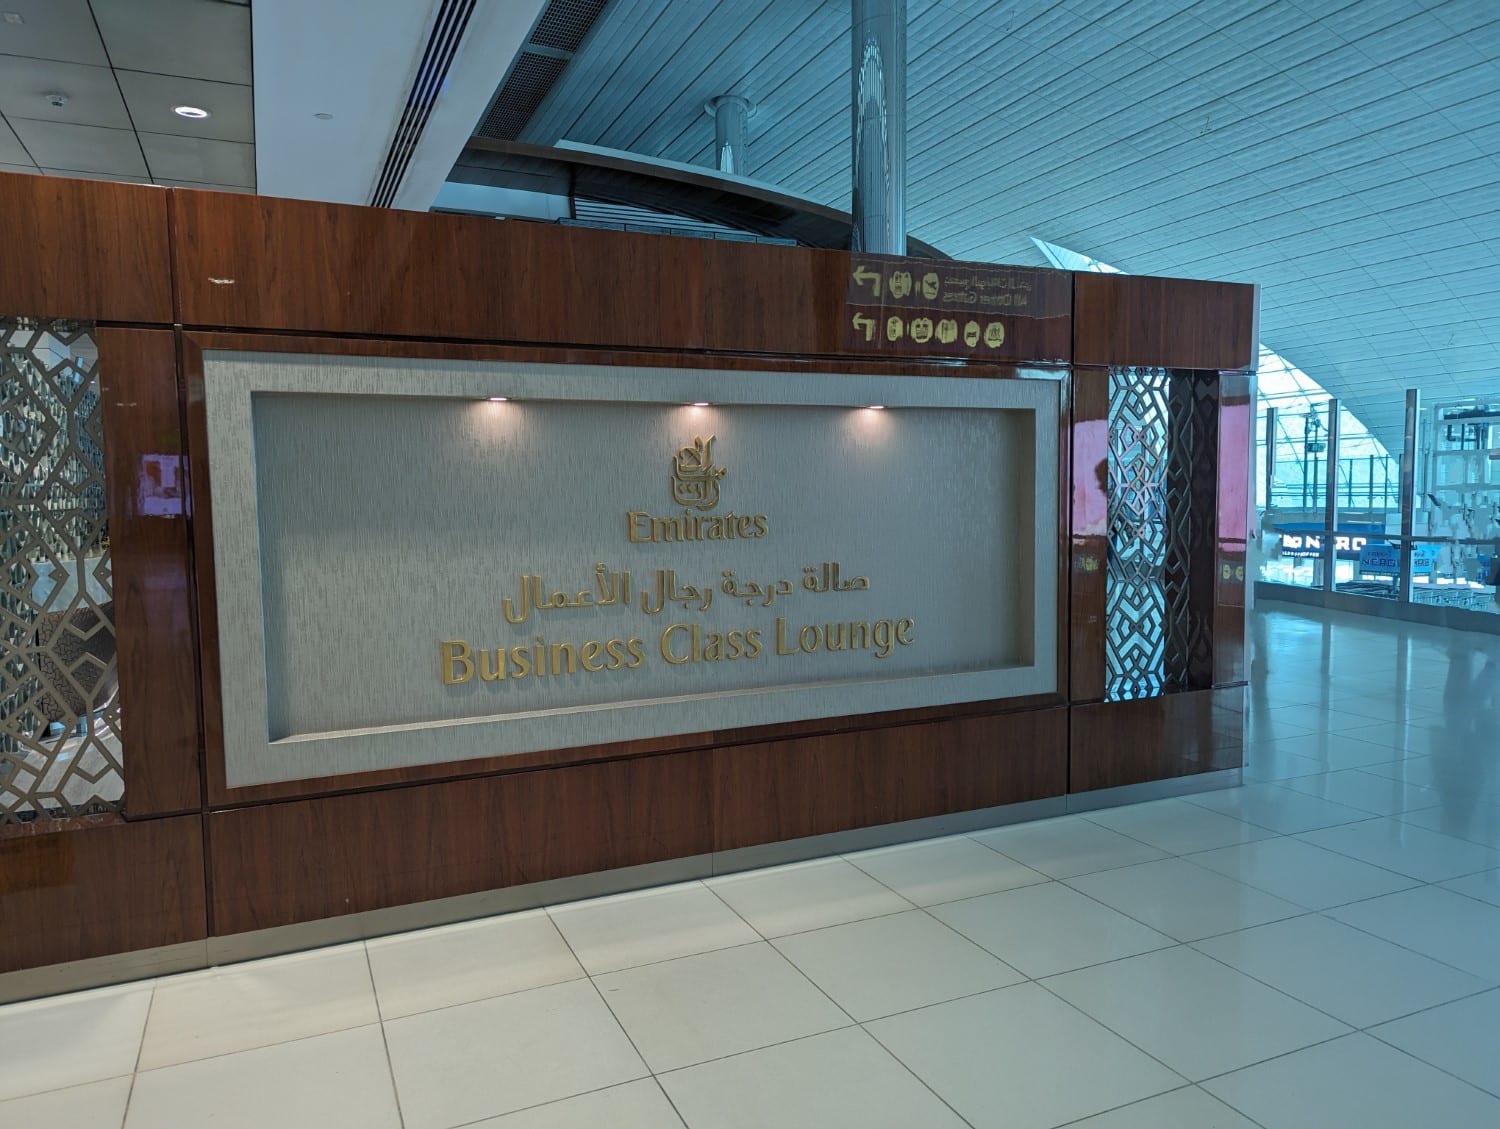 Sign for entry to the Emirates business class lounge in Dubai International Airport.